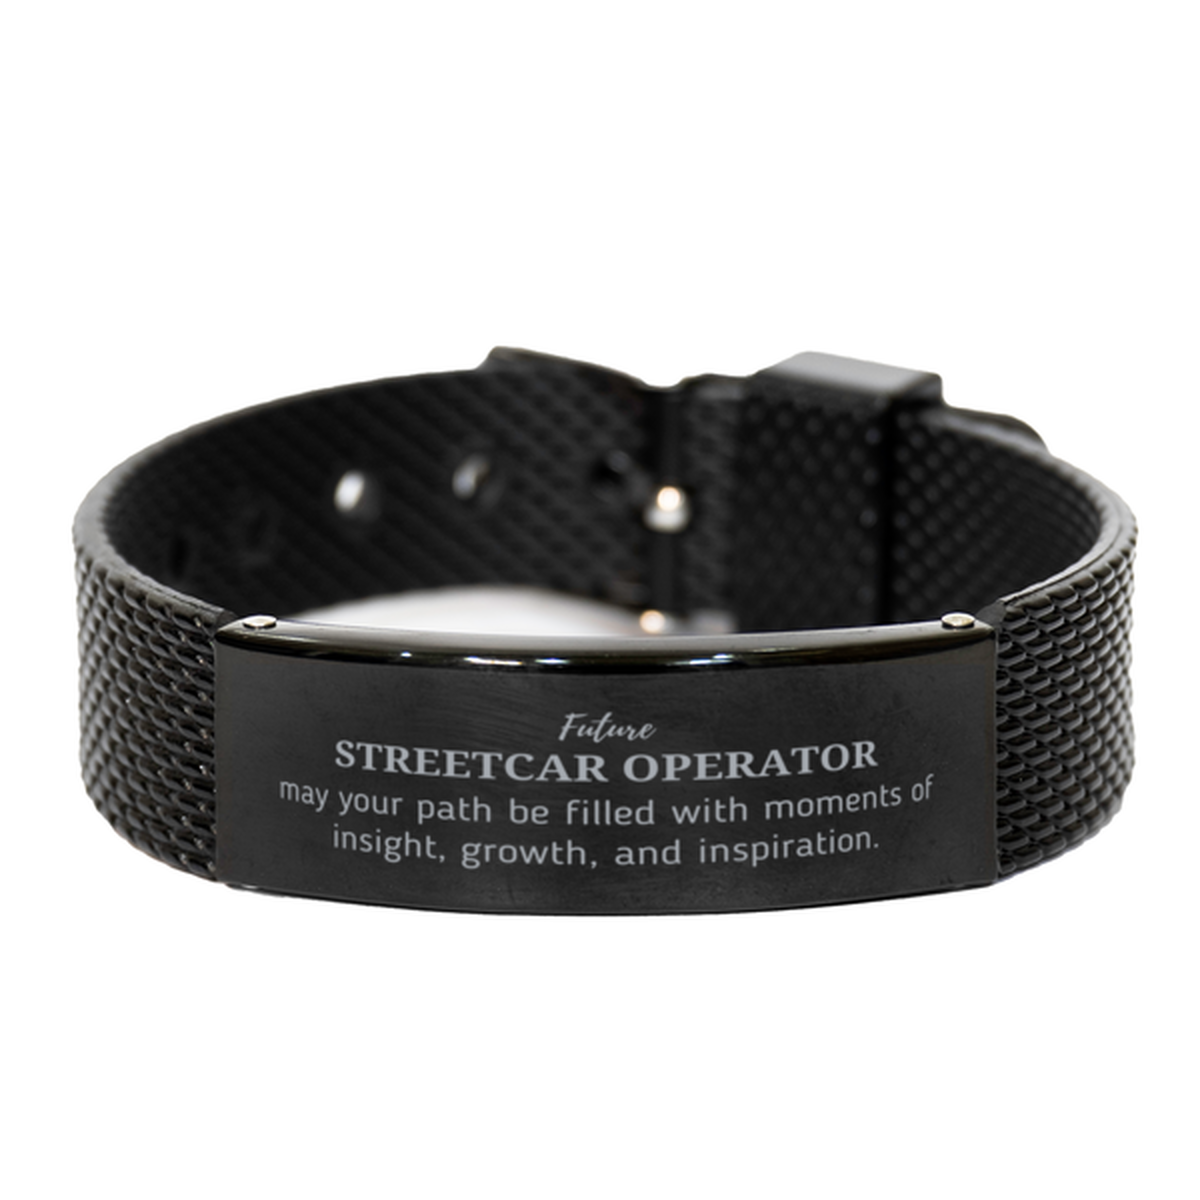 Future Streetcar Operator Gifts, May your path be filled with moments of insight, Graduation Gifts for New Streetcar Operator, Christmas Unique Black Shark Mesh Bracelet For Men, Women, Friends